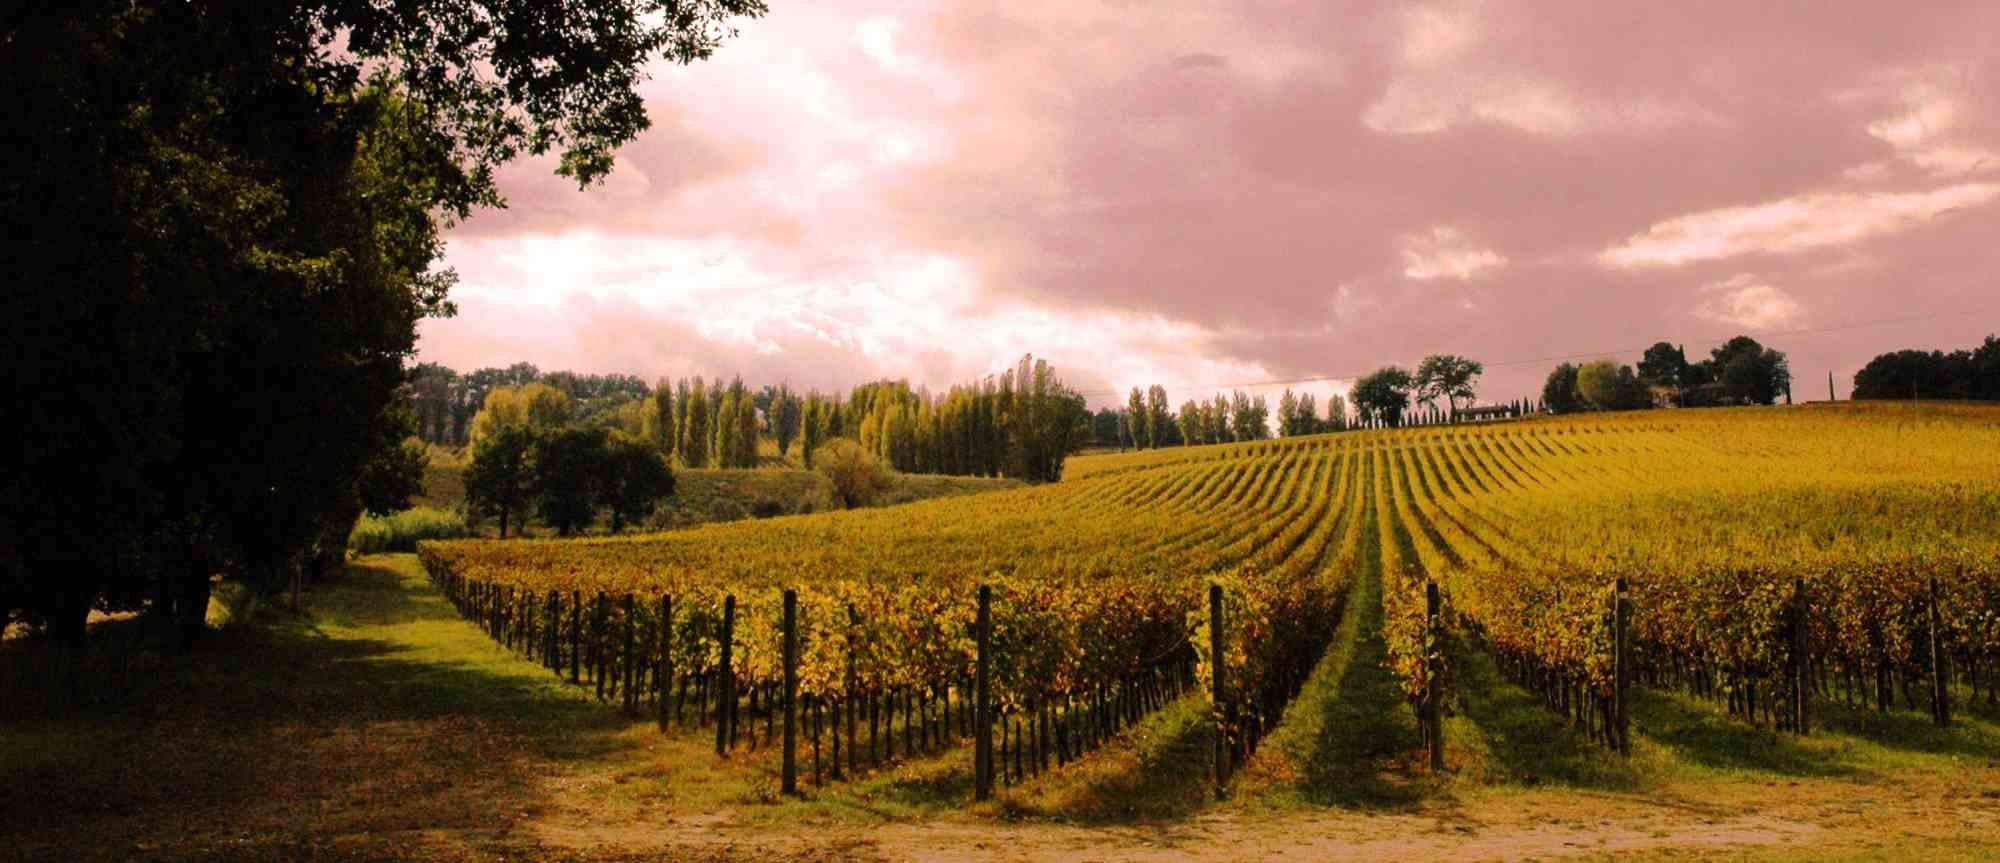 The grandfather's vineyard is one of the best photo on canvas realized by Giuseppe Marani in 2010.

Always passionate about landscapes and photography, the artist then devoted himself to landscaping. He greatly admires the beauty of the landscapes